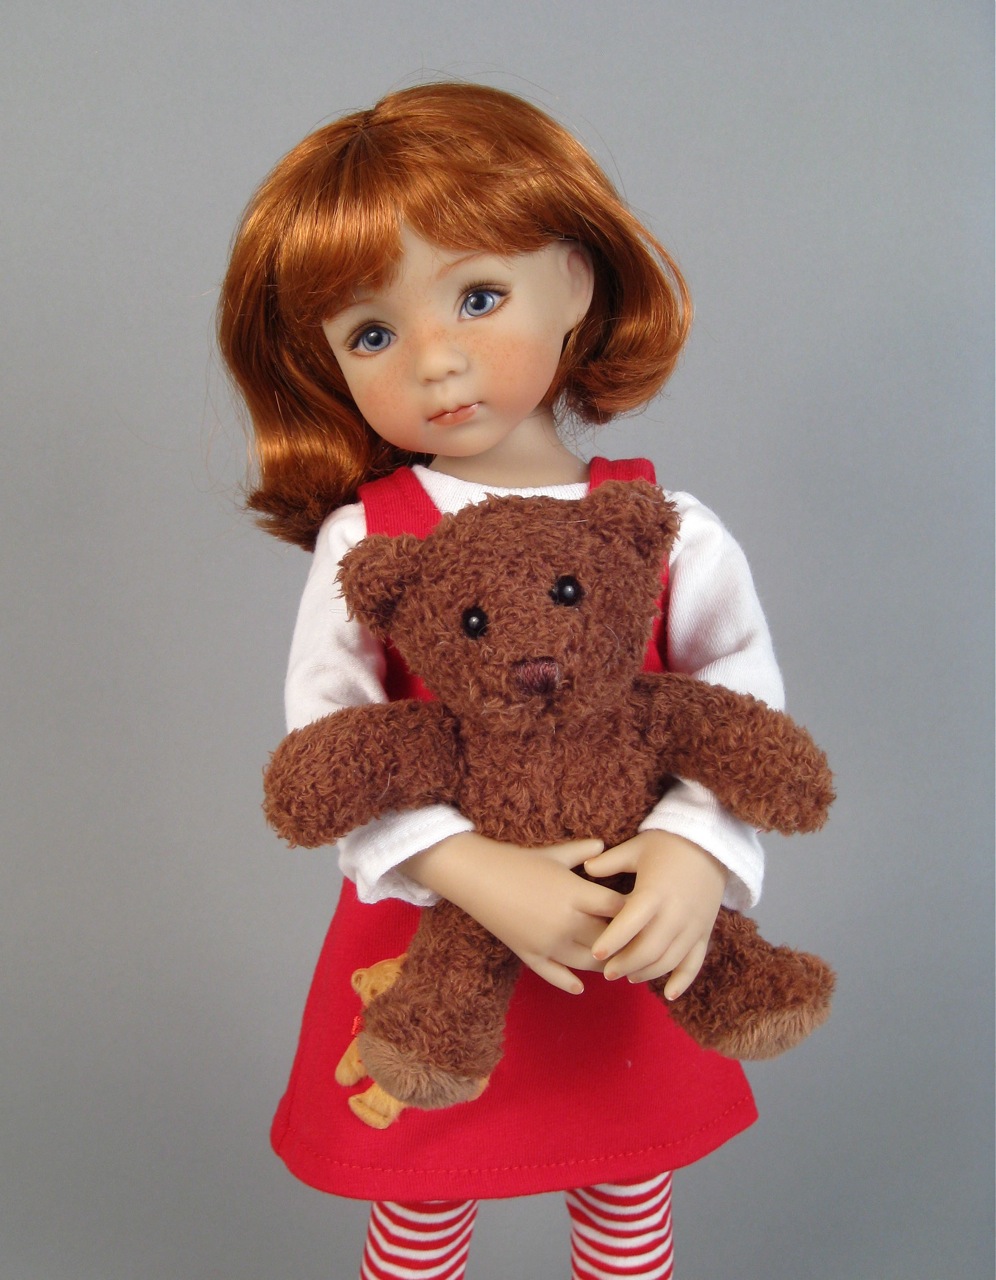 Tanya Mini Pal 13" collectible doll by Dianna Effner 